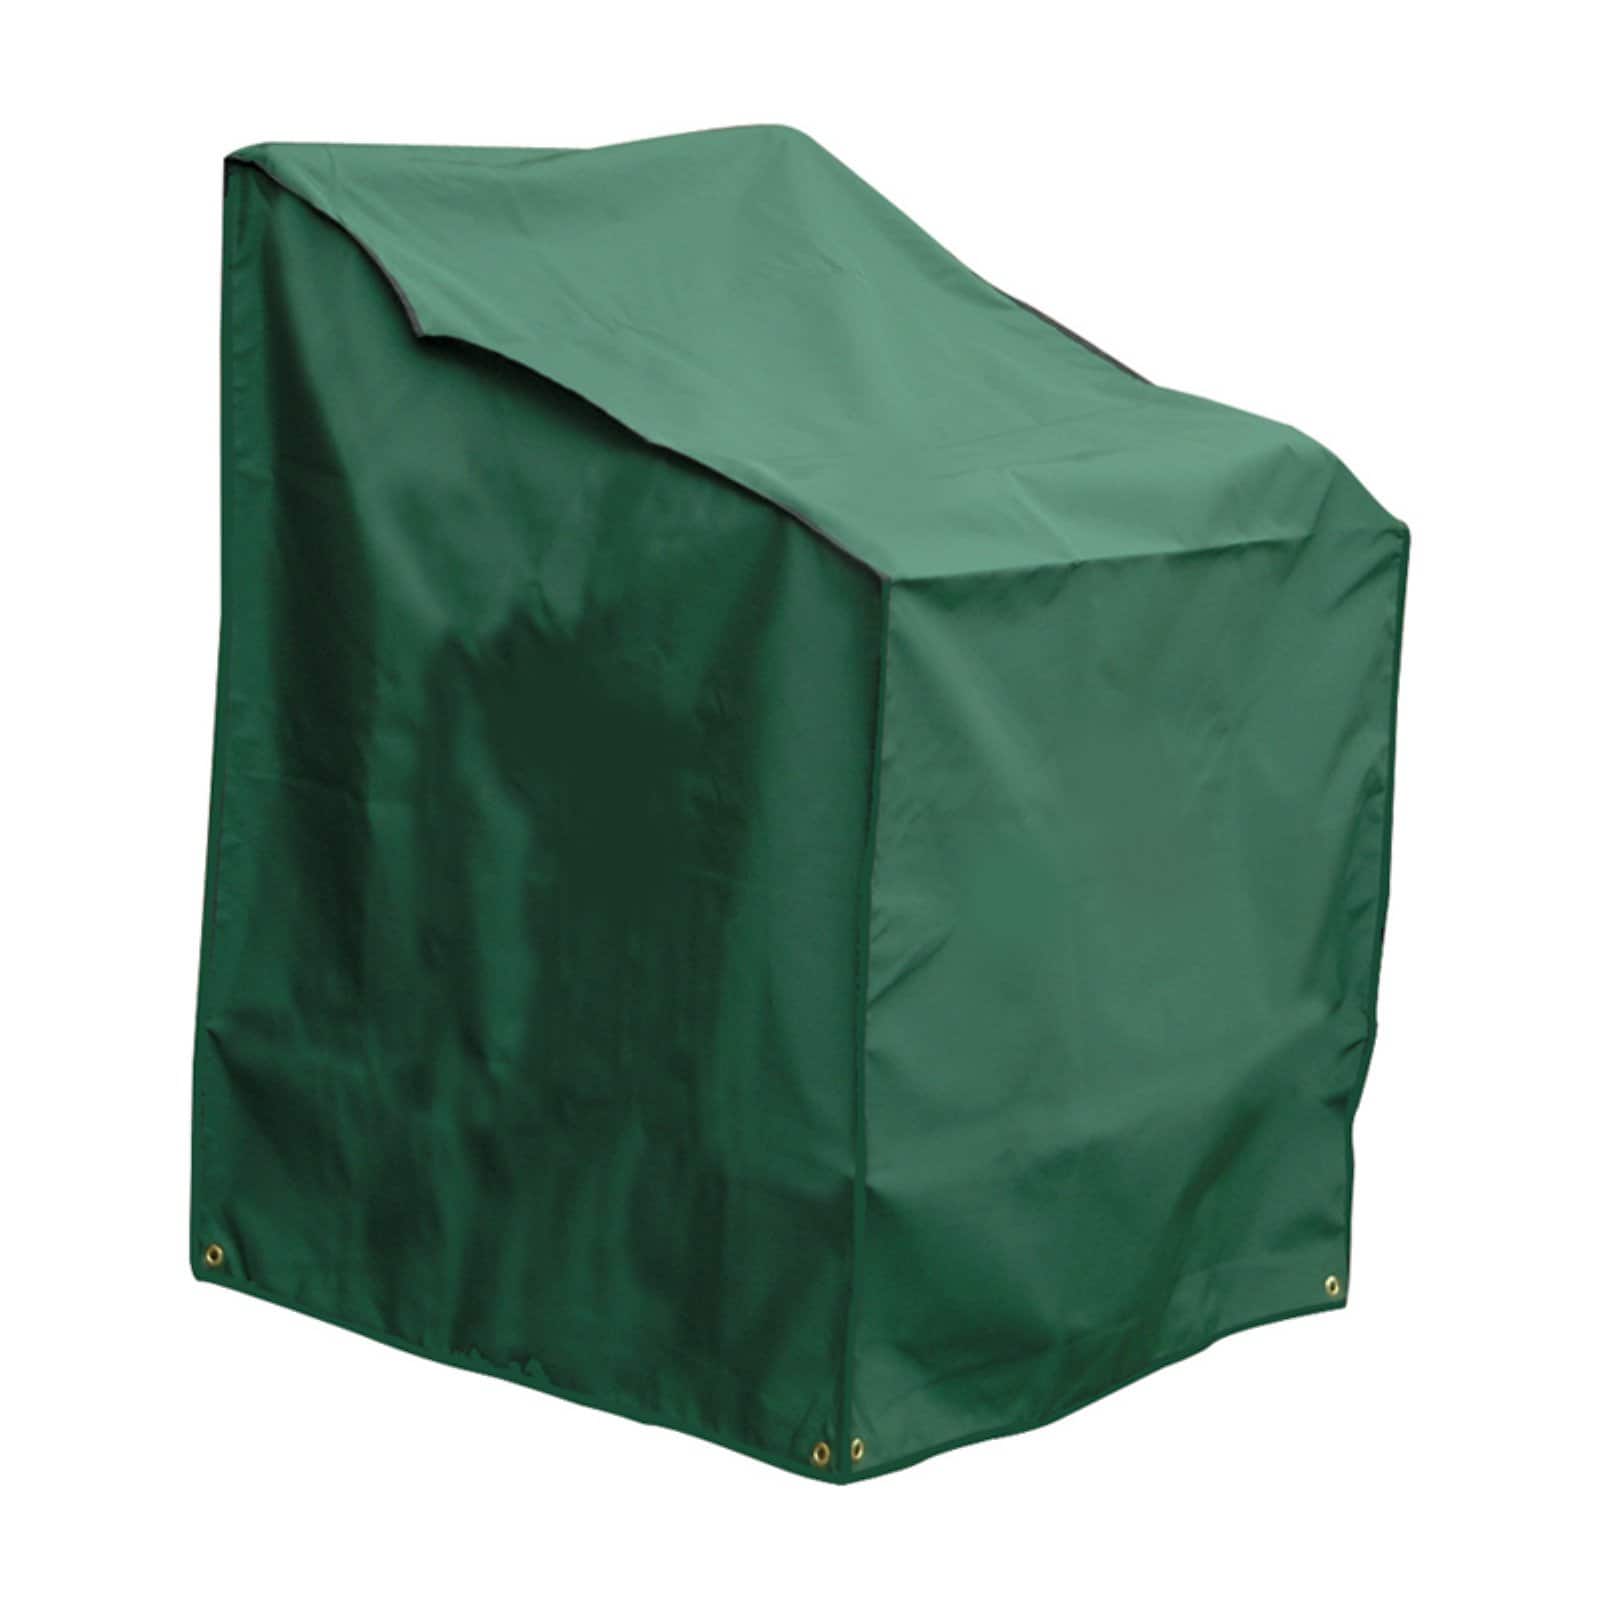 Bosmere C640 Wicker Chair Cover - 38 x 36 in. - Green - image 1 of 1